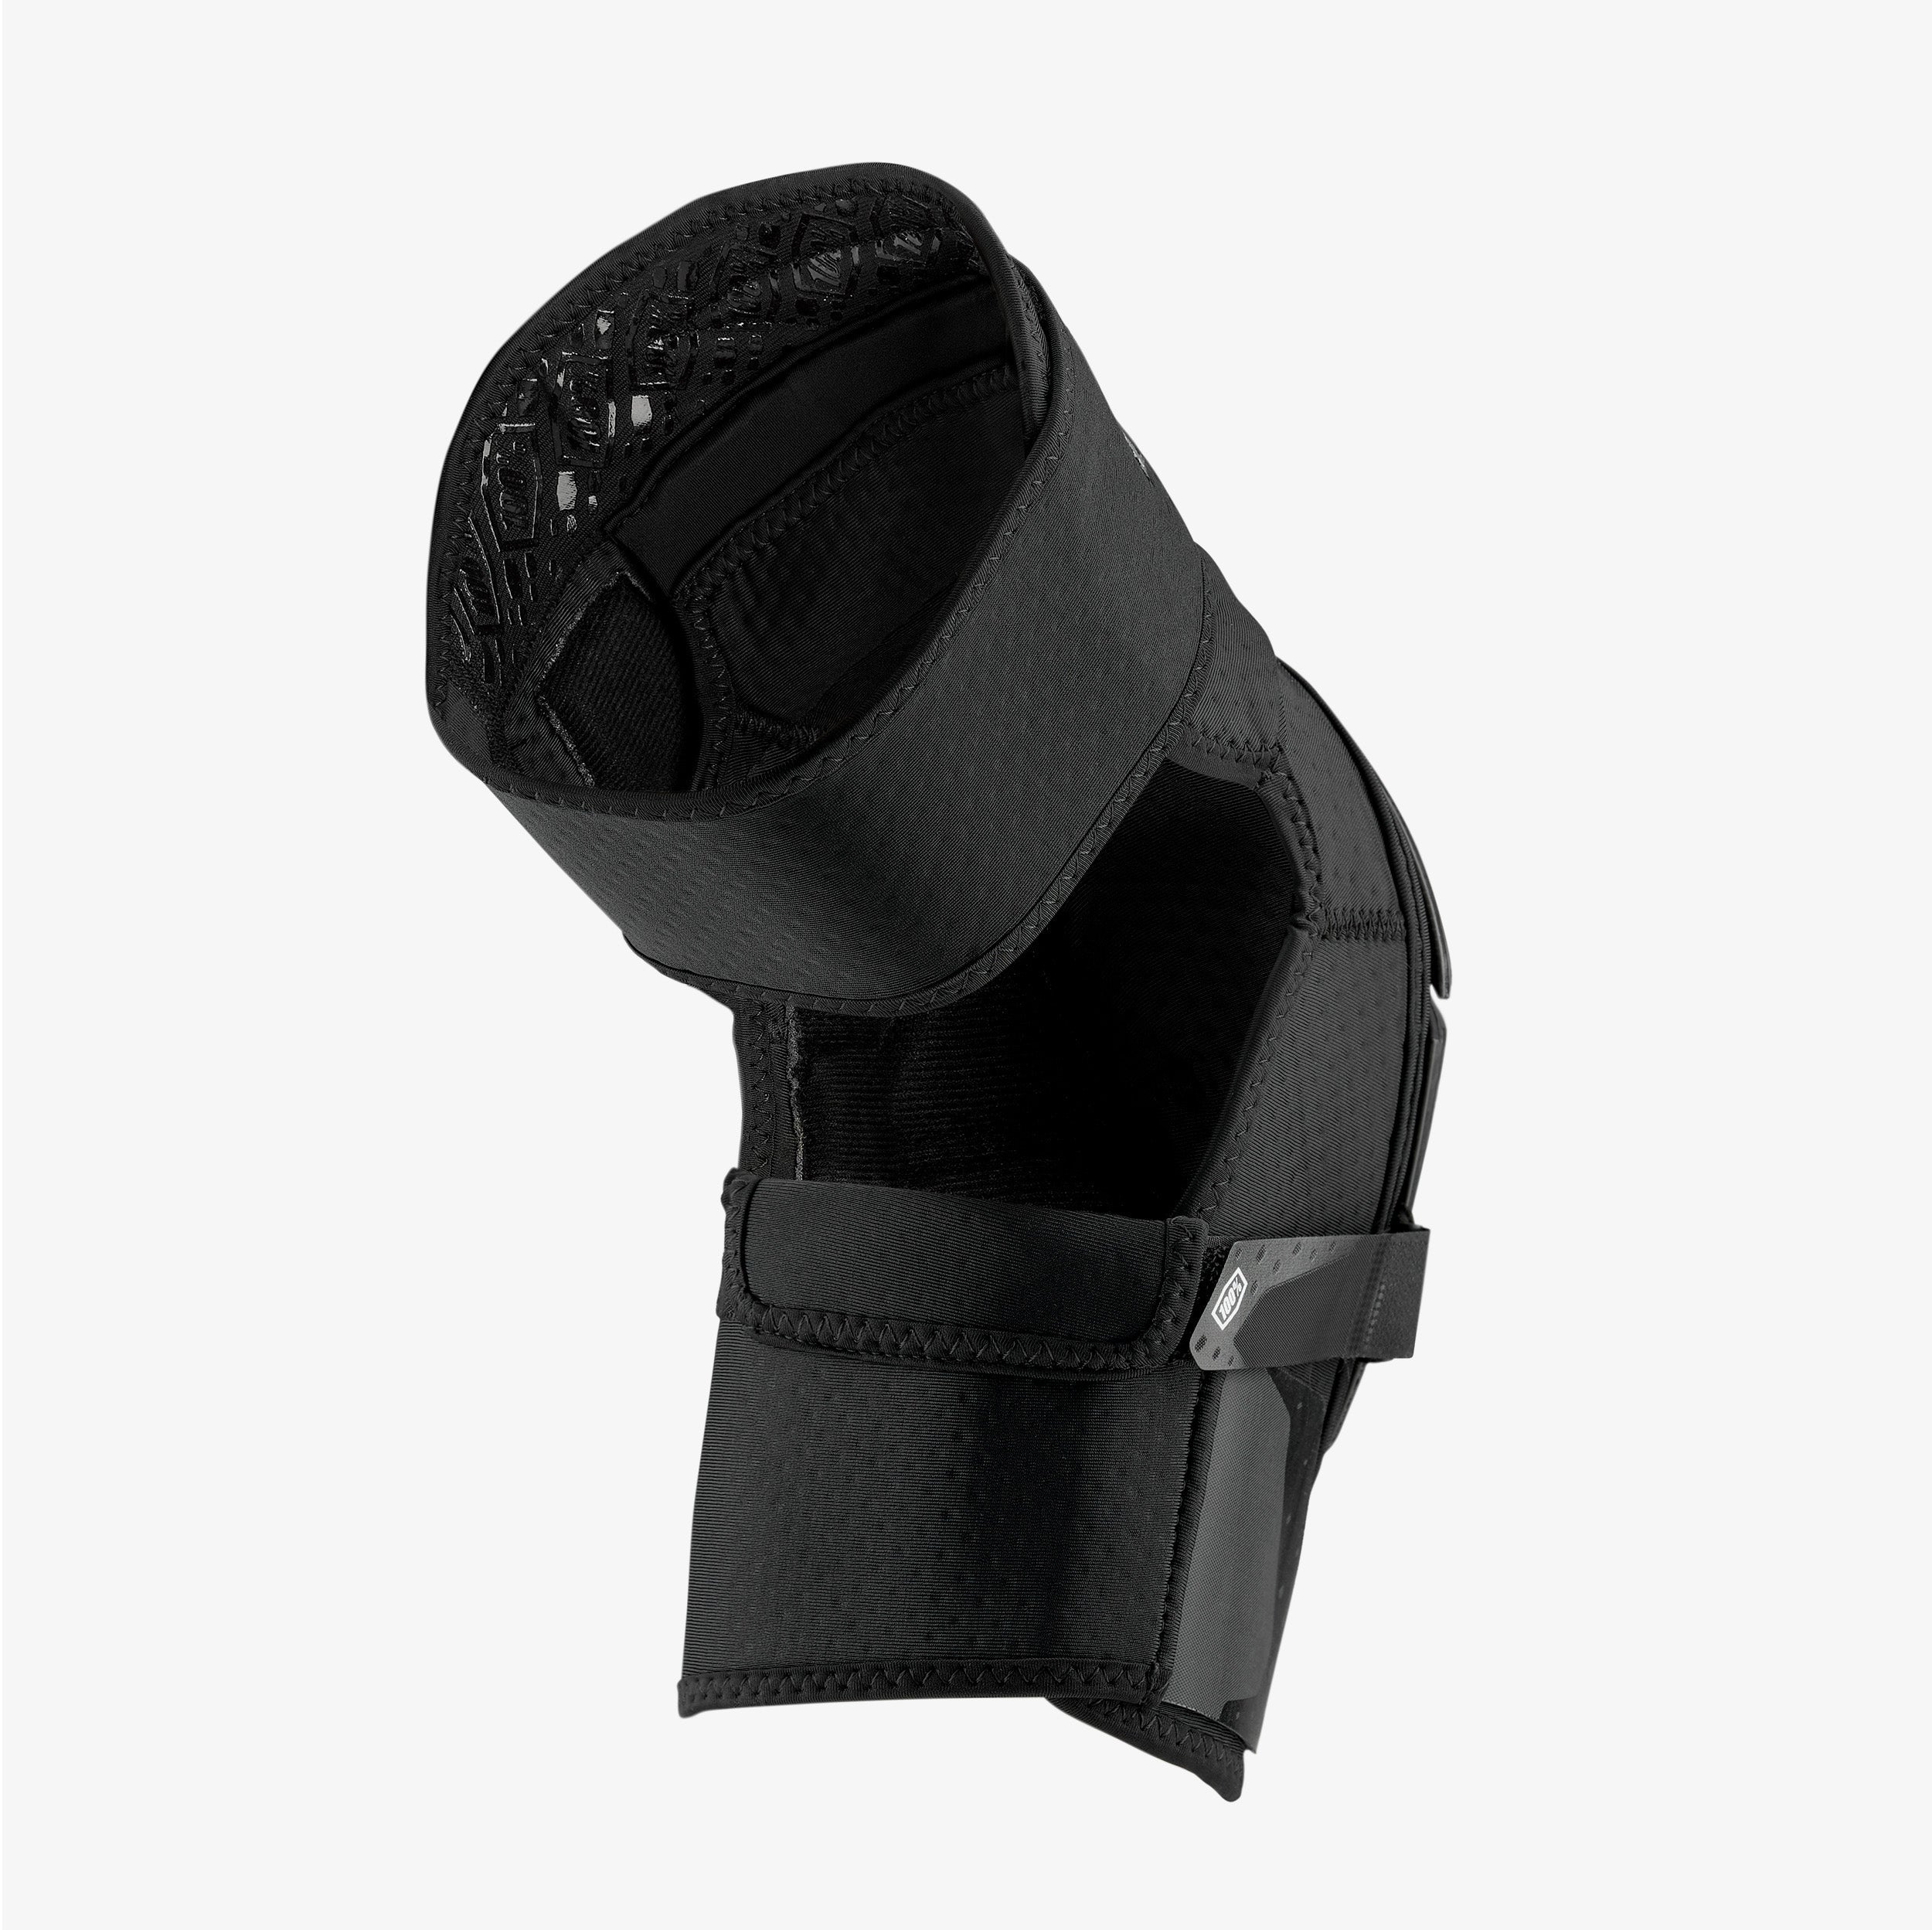 FORTIS Knee Guards Black - Secondary